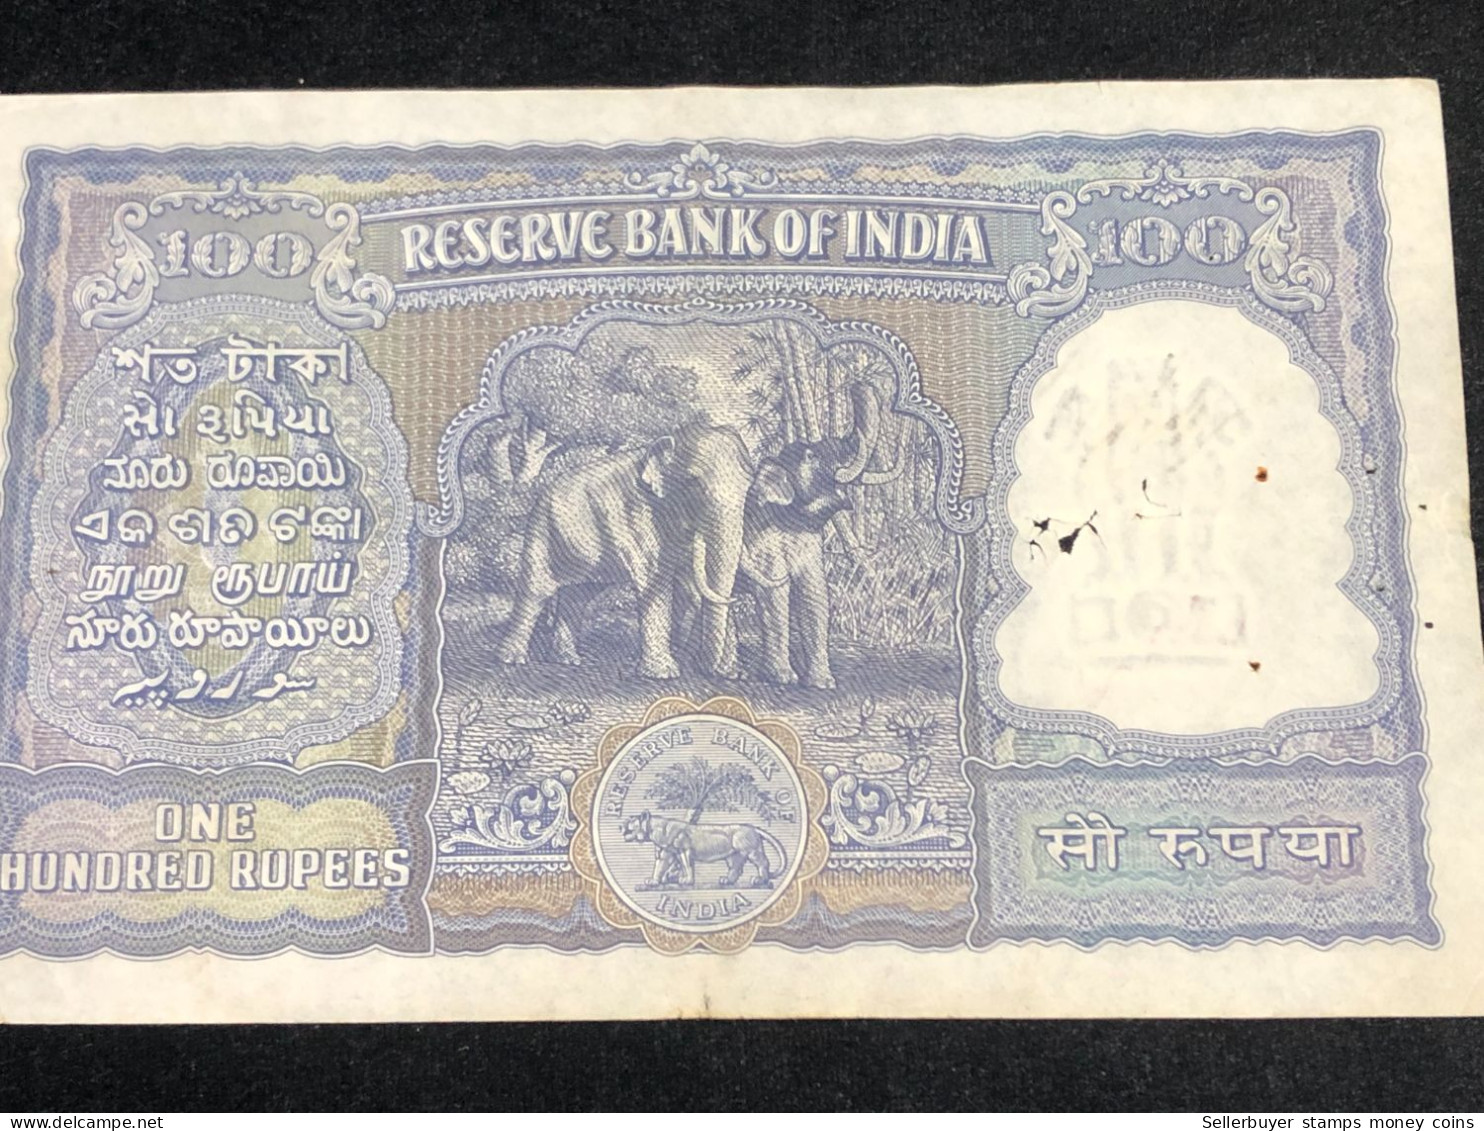 INDIA 100 RUPEES P-43  1957 TIGER ELEPHANT DAM MONEY BILL Rhas pinhole ARE BANK NOTE Red numbers above and below 1 pcs a